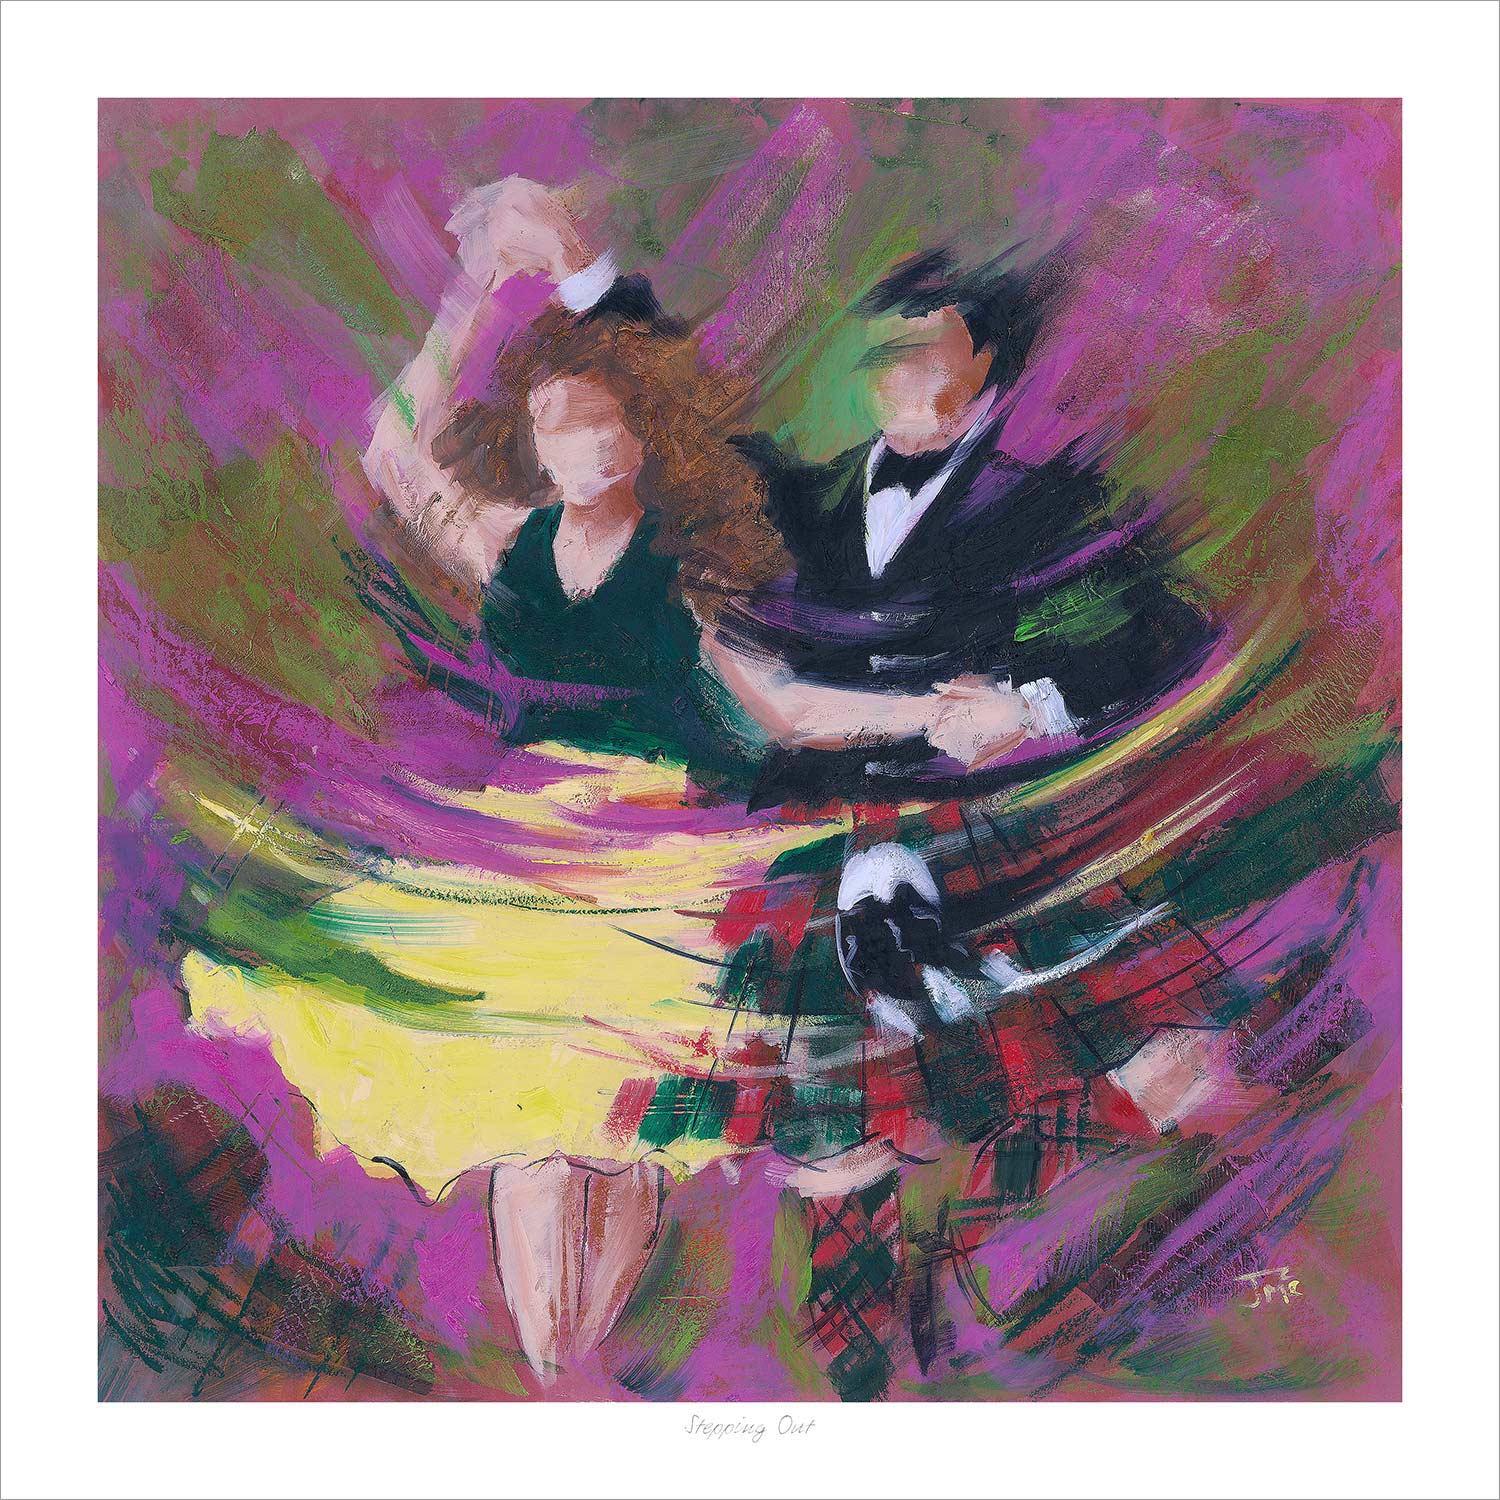 Stepping Out Art Print from an original painting by artist Janet McCrorie